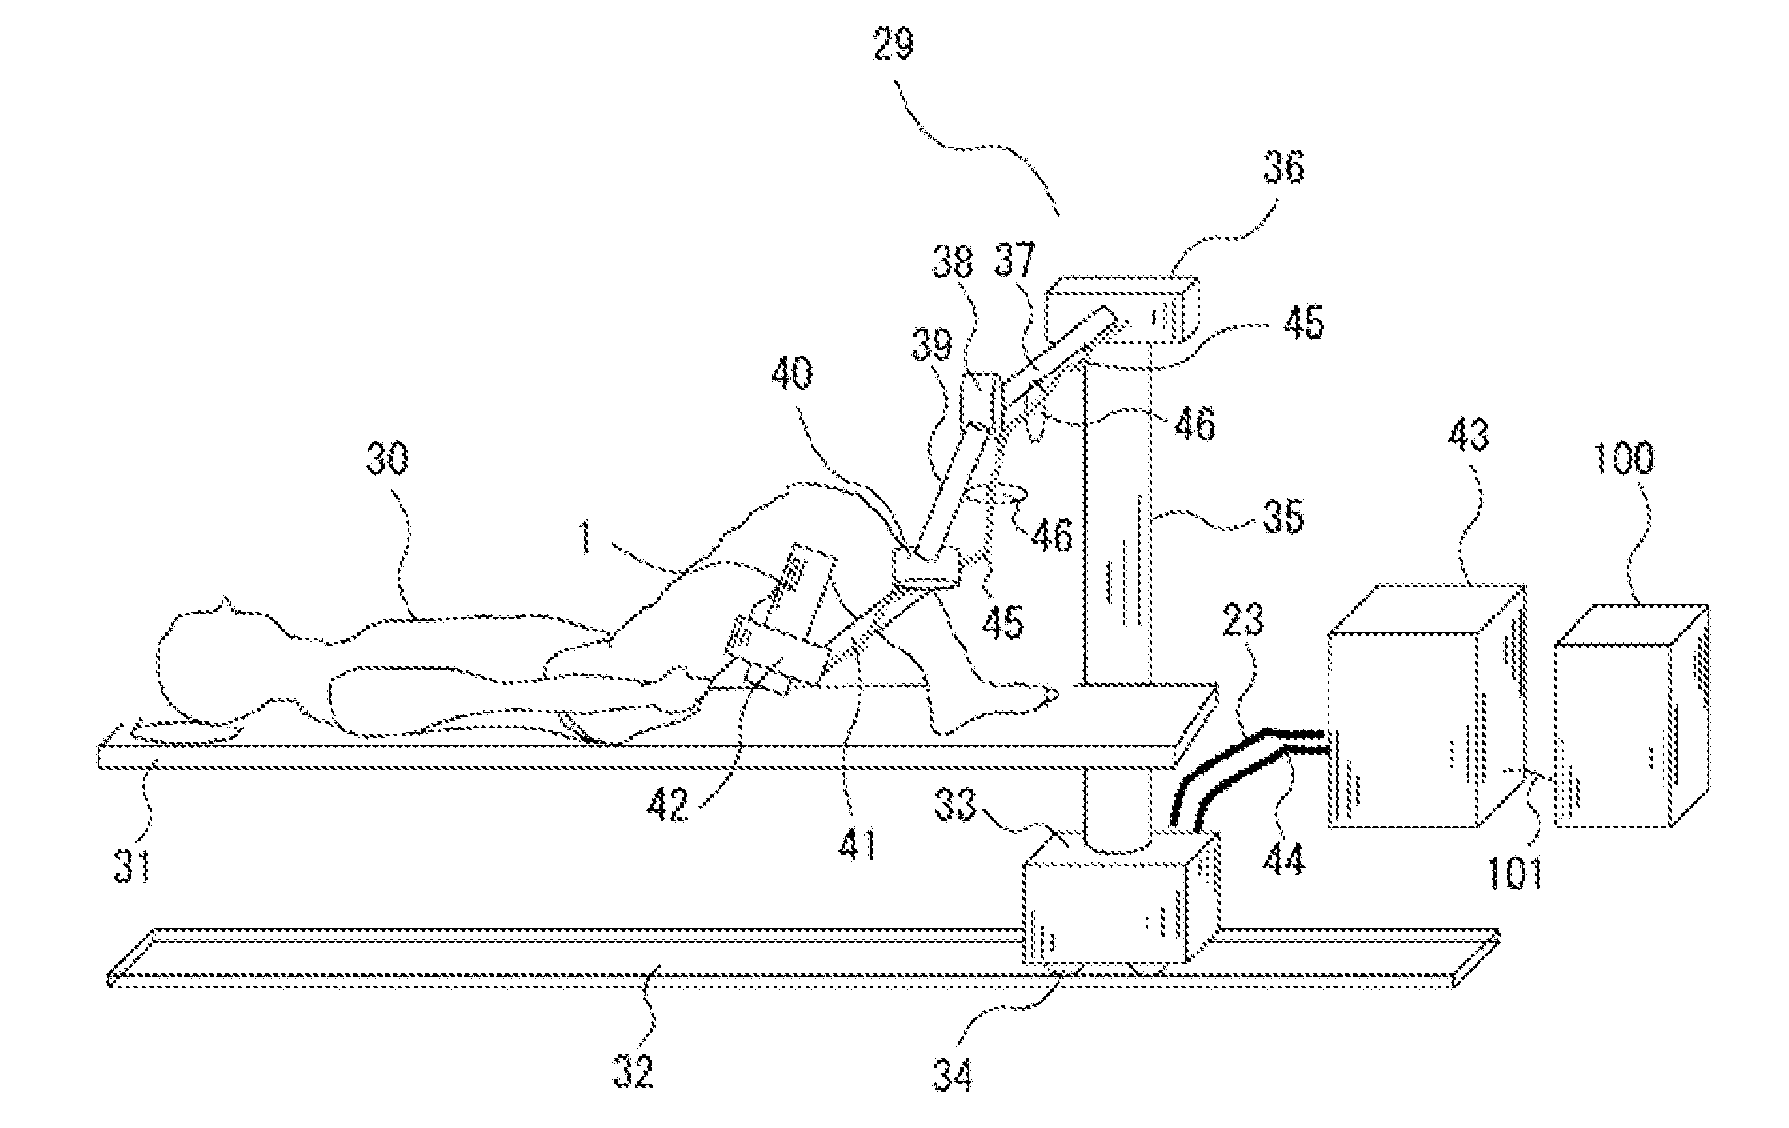 Magnetic induction system and operating method for same incorporation by reference